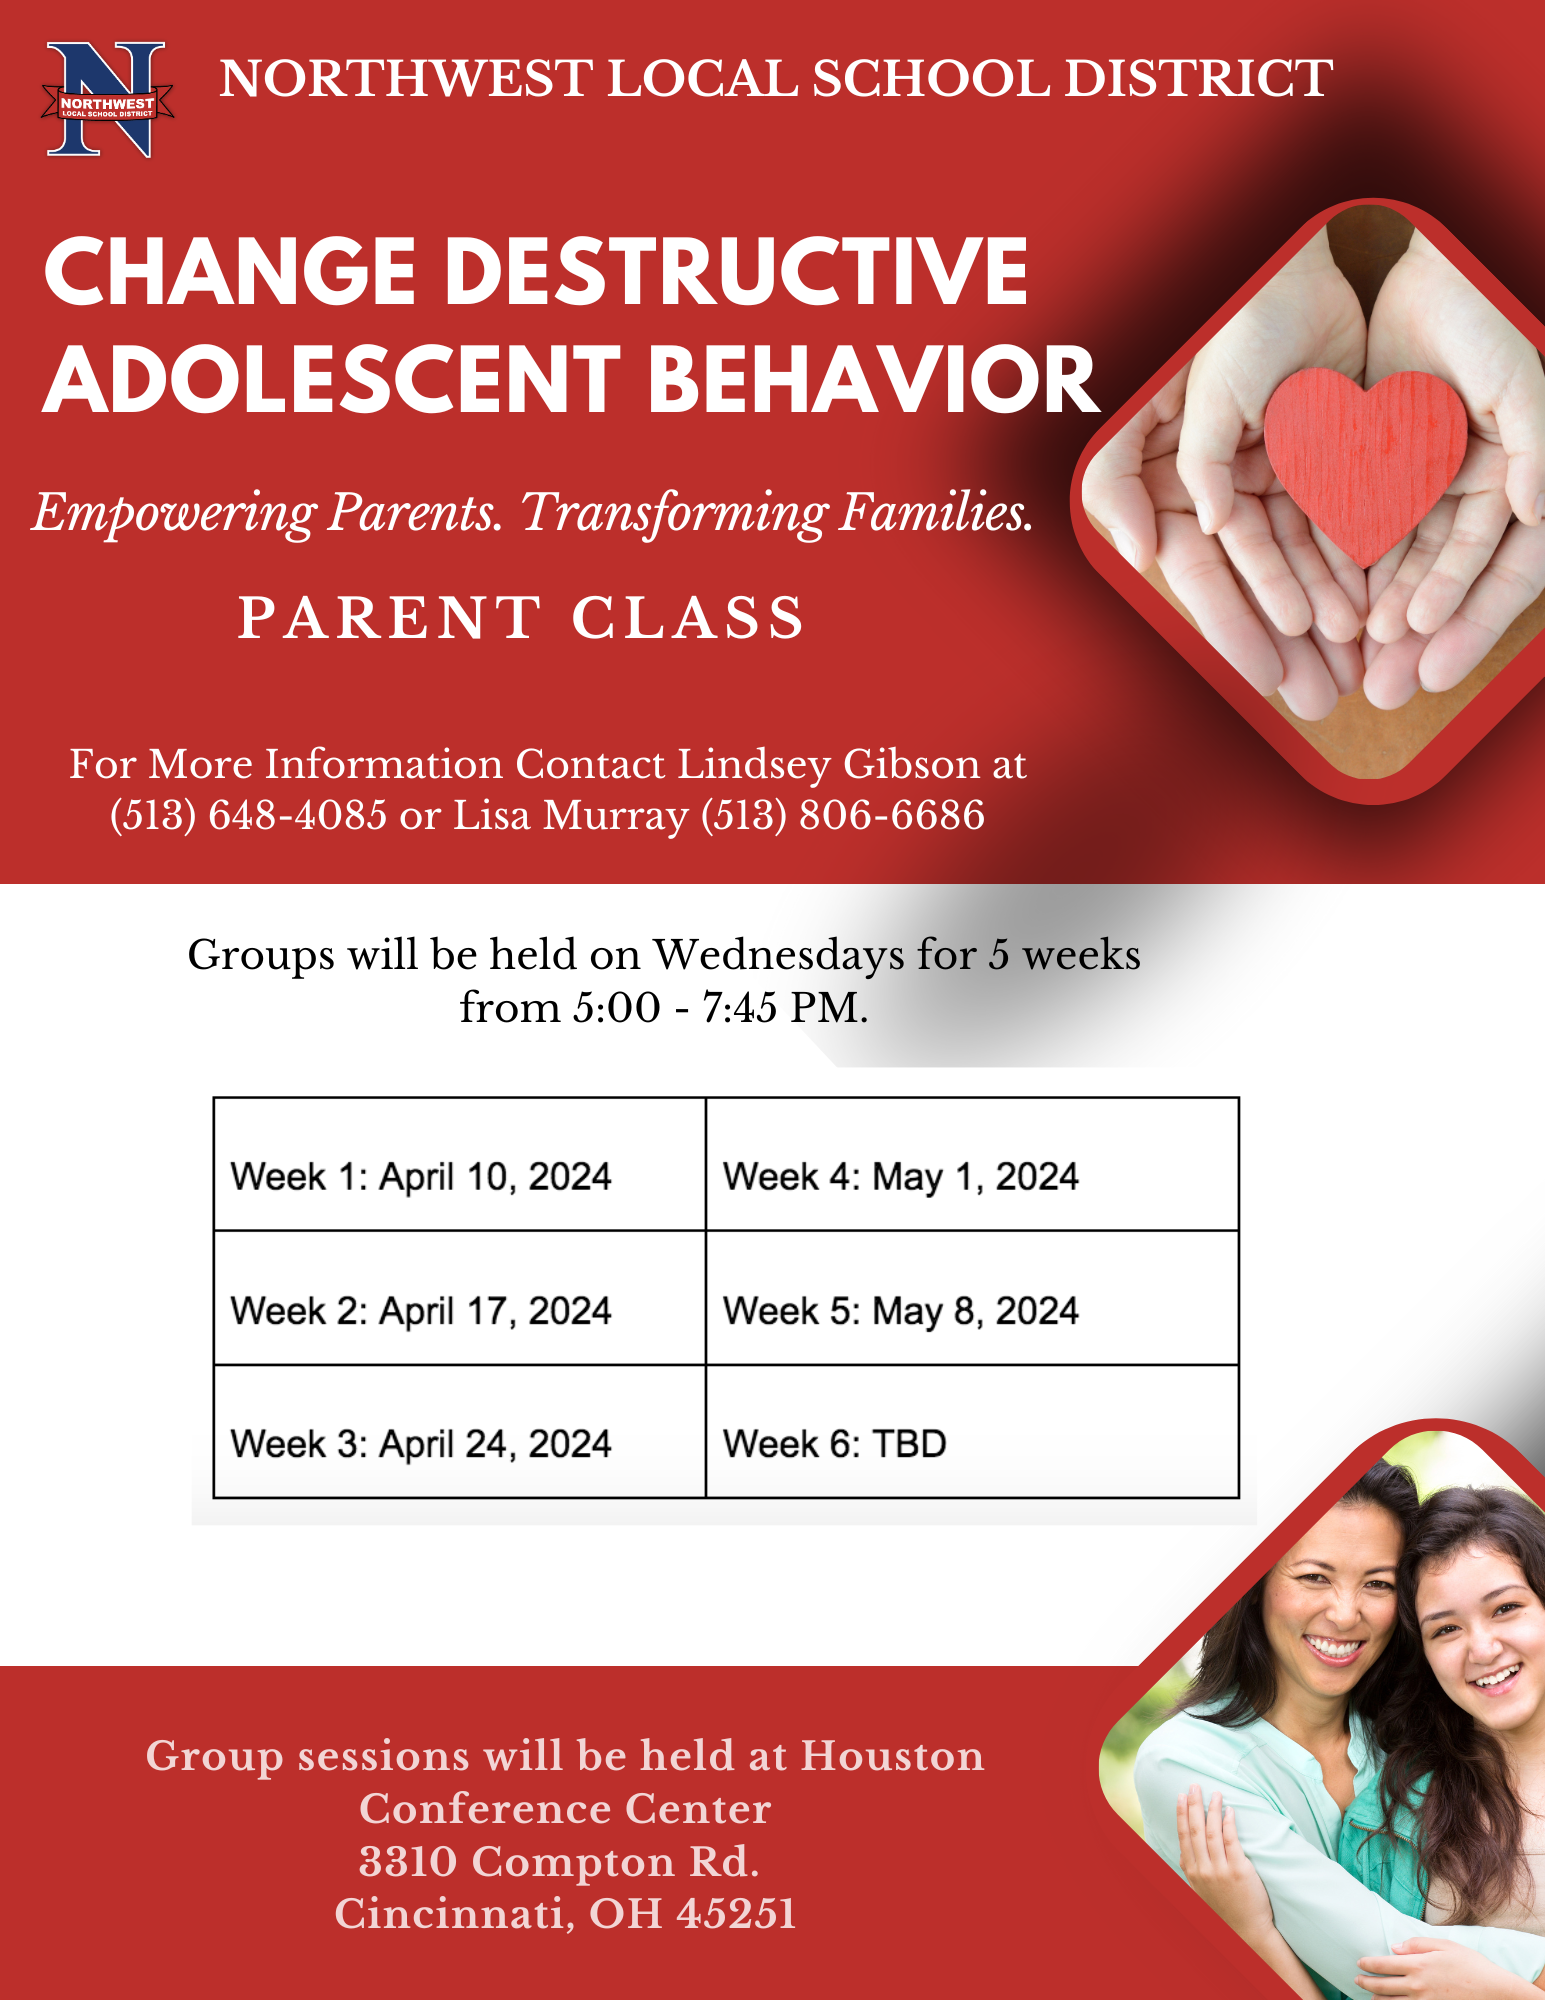 Space is Limited, please reserve your spot today! Parent Class Sign Up Link   Contact Lindsey Gibson at (513) 648-4085 or Lisa Murray (513) 549-0417 (cell) (513) 806-6686 (office)   Group sessions will be held at Houston Conference Center (3310 Compton Rd., Cincinnati, OH 45251).   Wednesday Sessions:  Parent Project 5:00-7:45  Week 1: April 10, 2024             Week 4: May 1, 2024           Week 2: April 17, 2024 Week 5: May 8, 2024 Week 3: April 24, 2024 Week 6: TBD